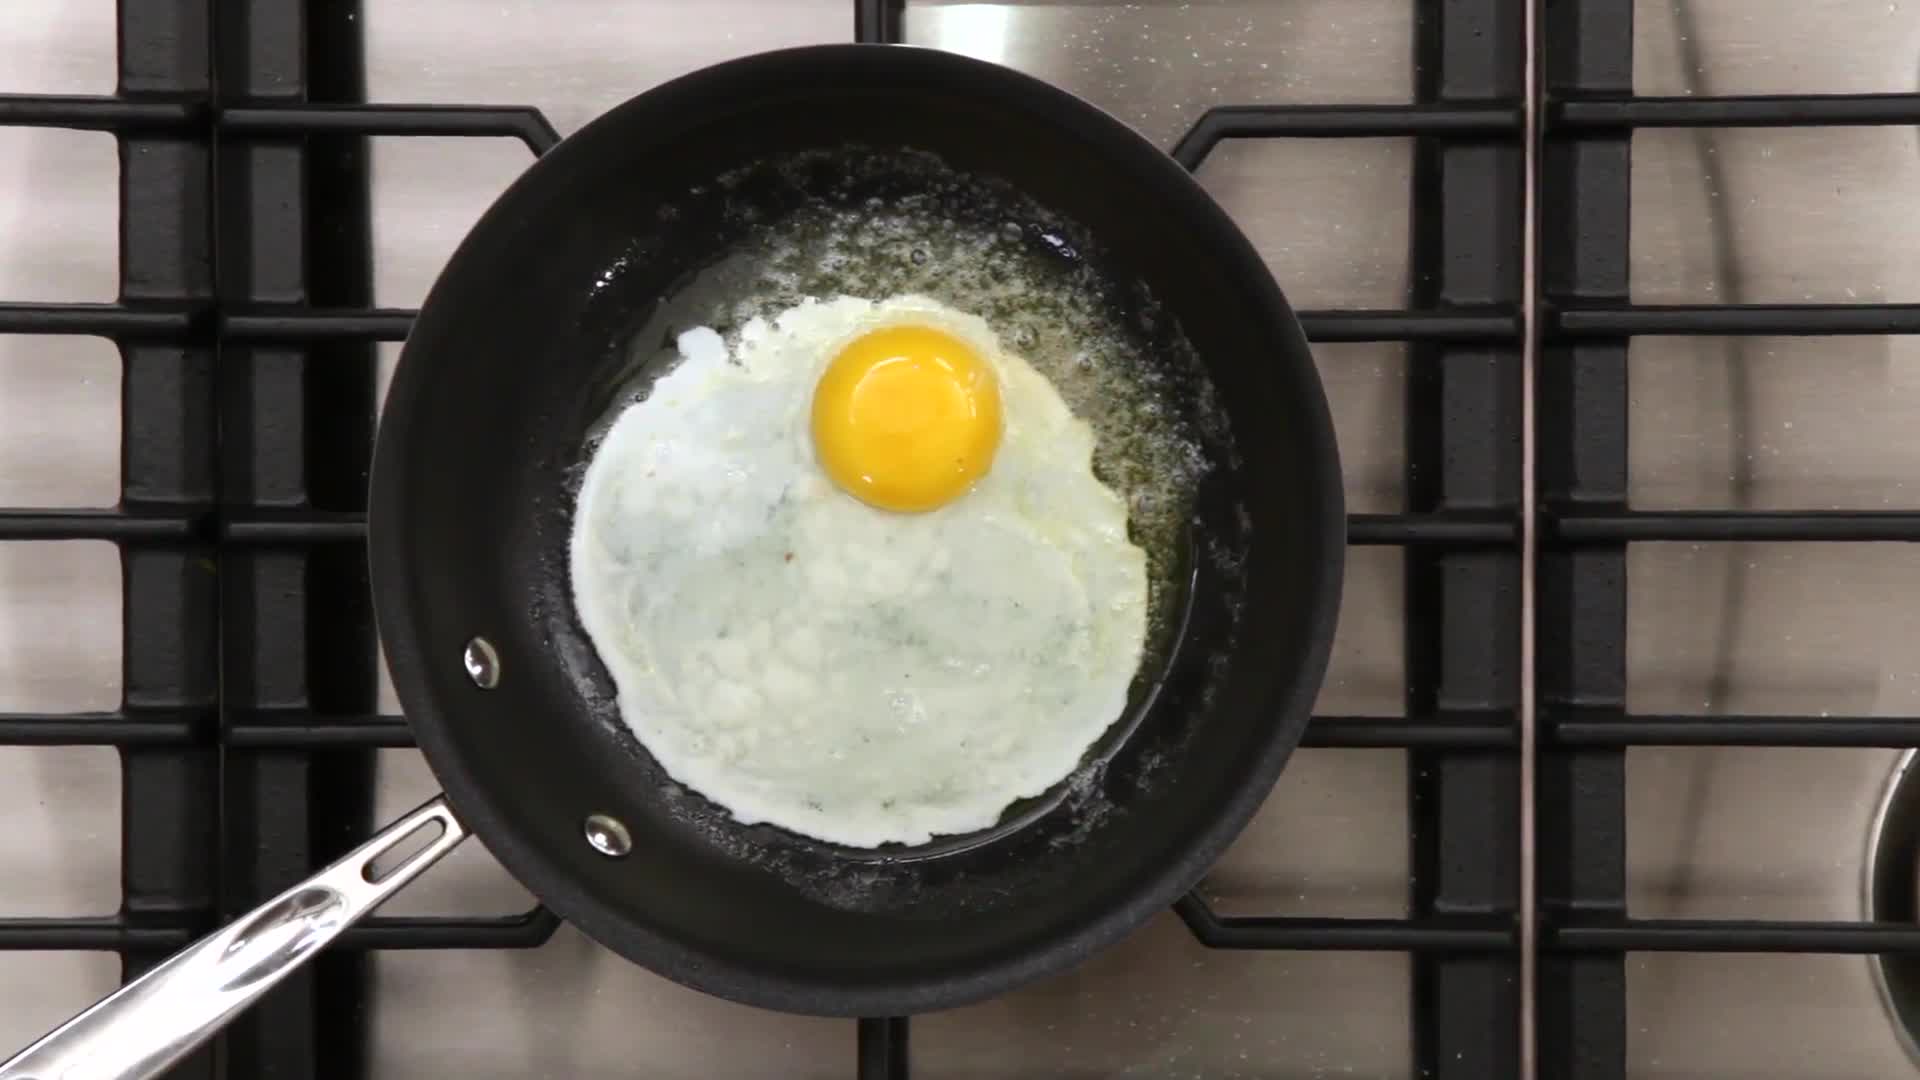 Watch How to Fry an Egg Over Easy, Epicurious Essentials: Cooking How-Tos